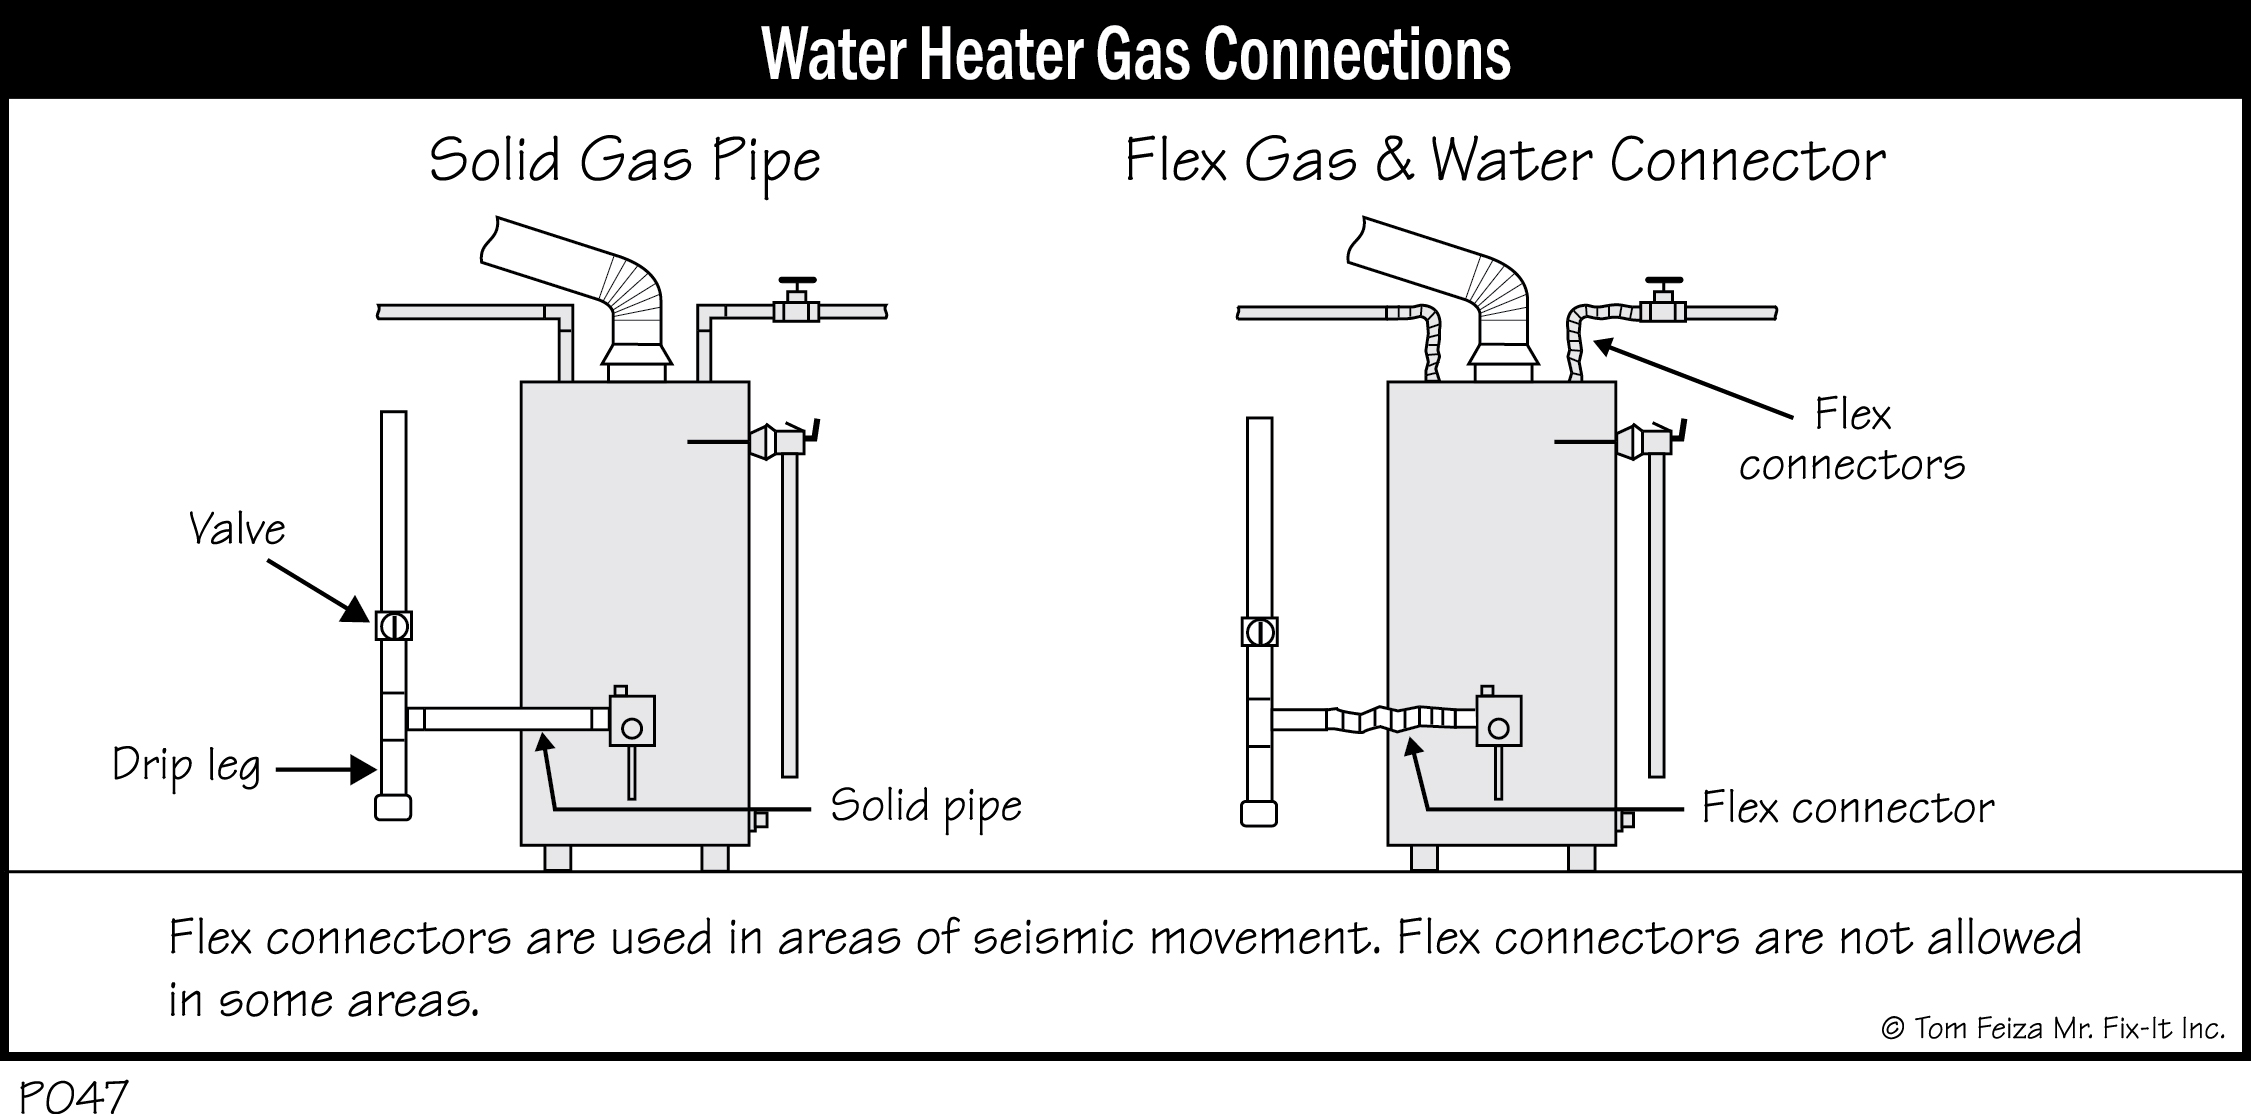 P047 - Water Heater Gas Connections